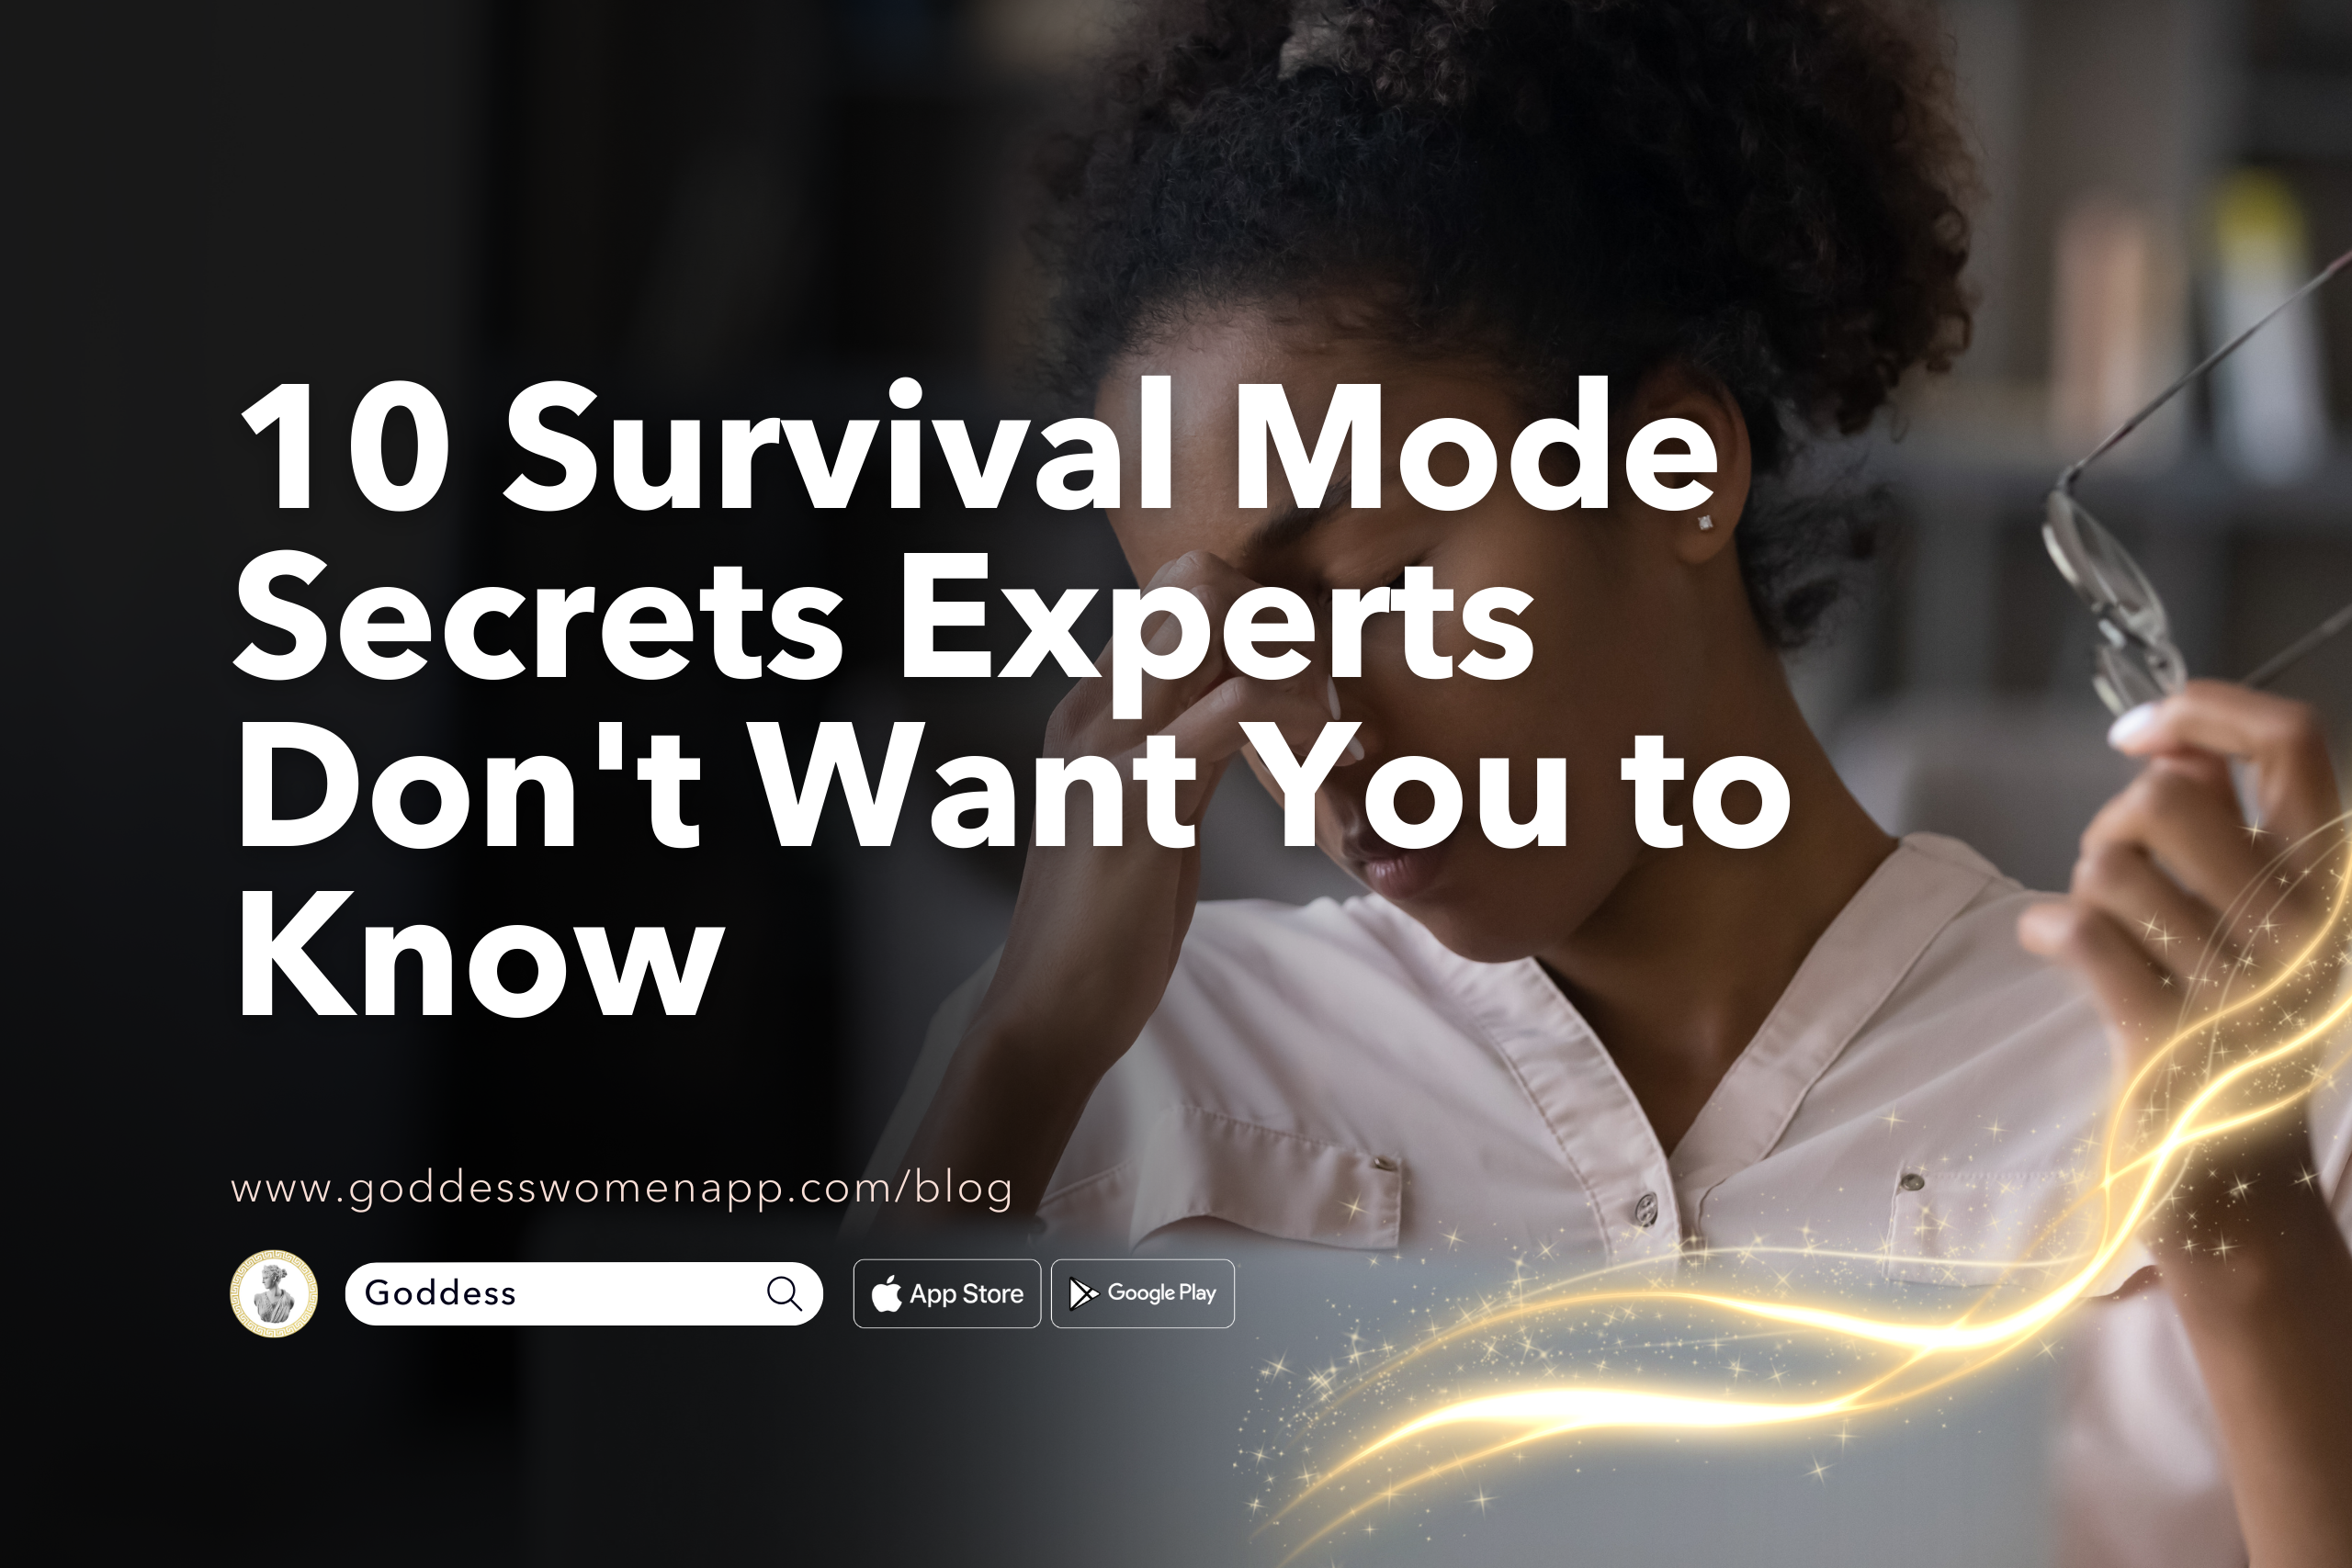 10 Survival Mode Secrets Experts Don’t Want You to Know